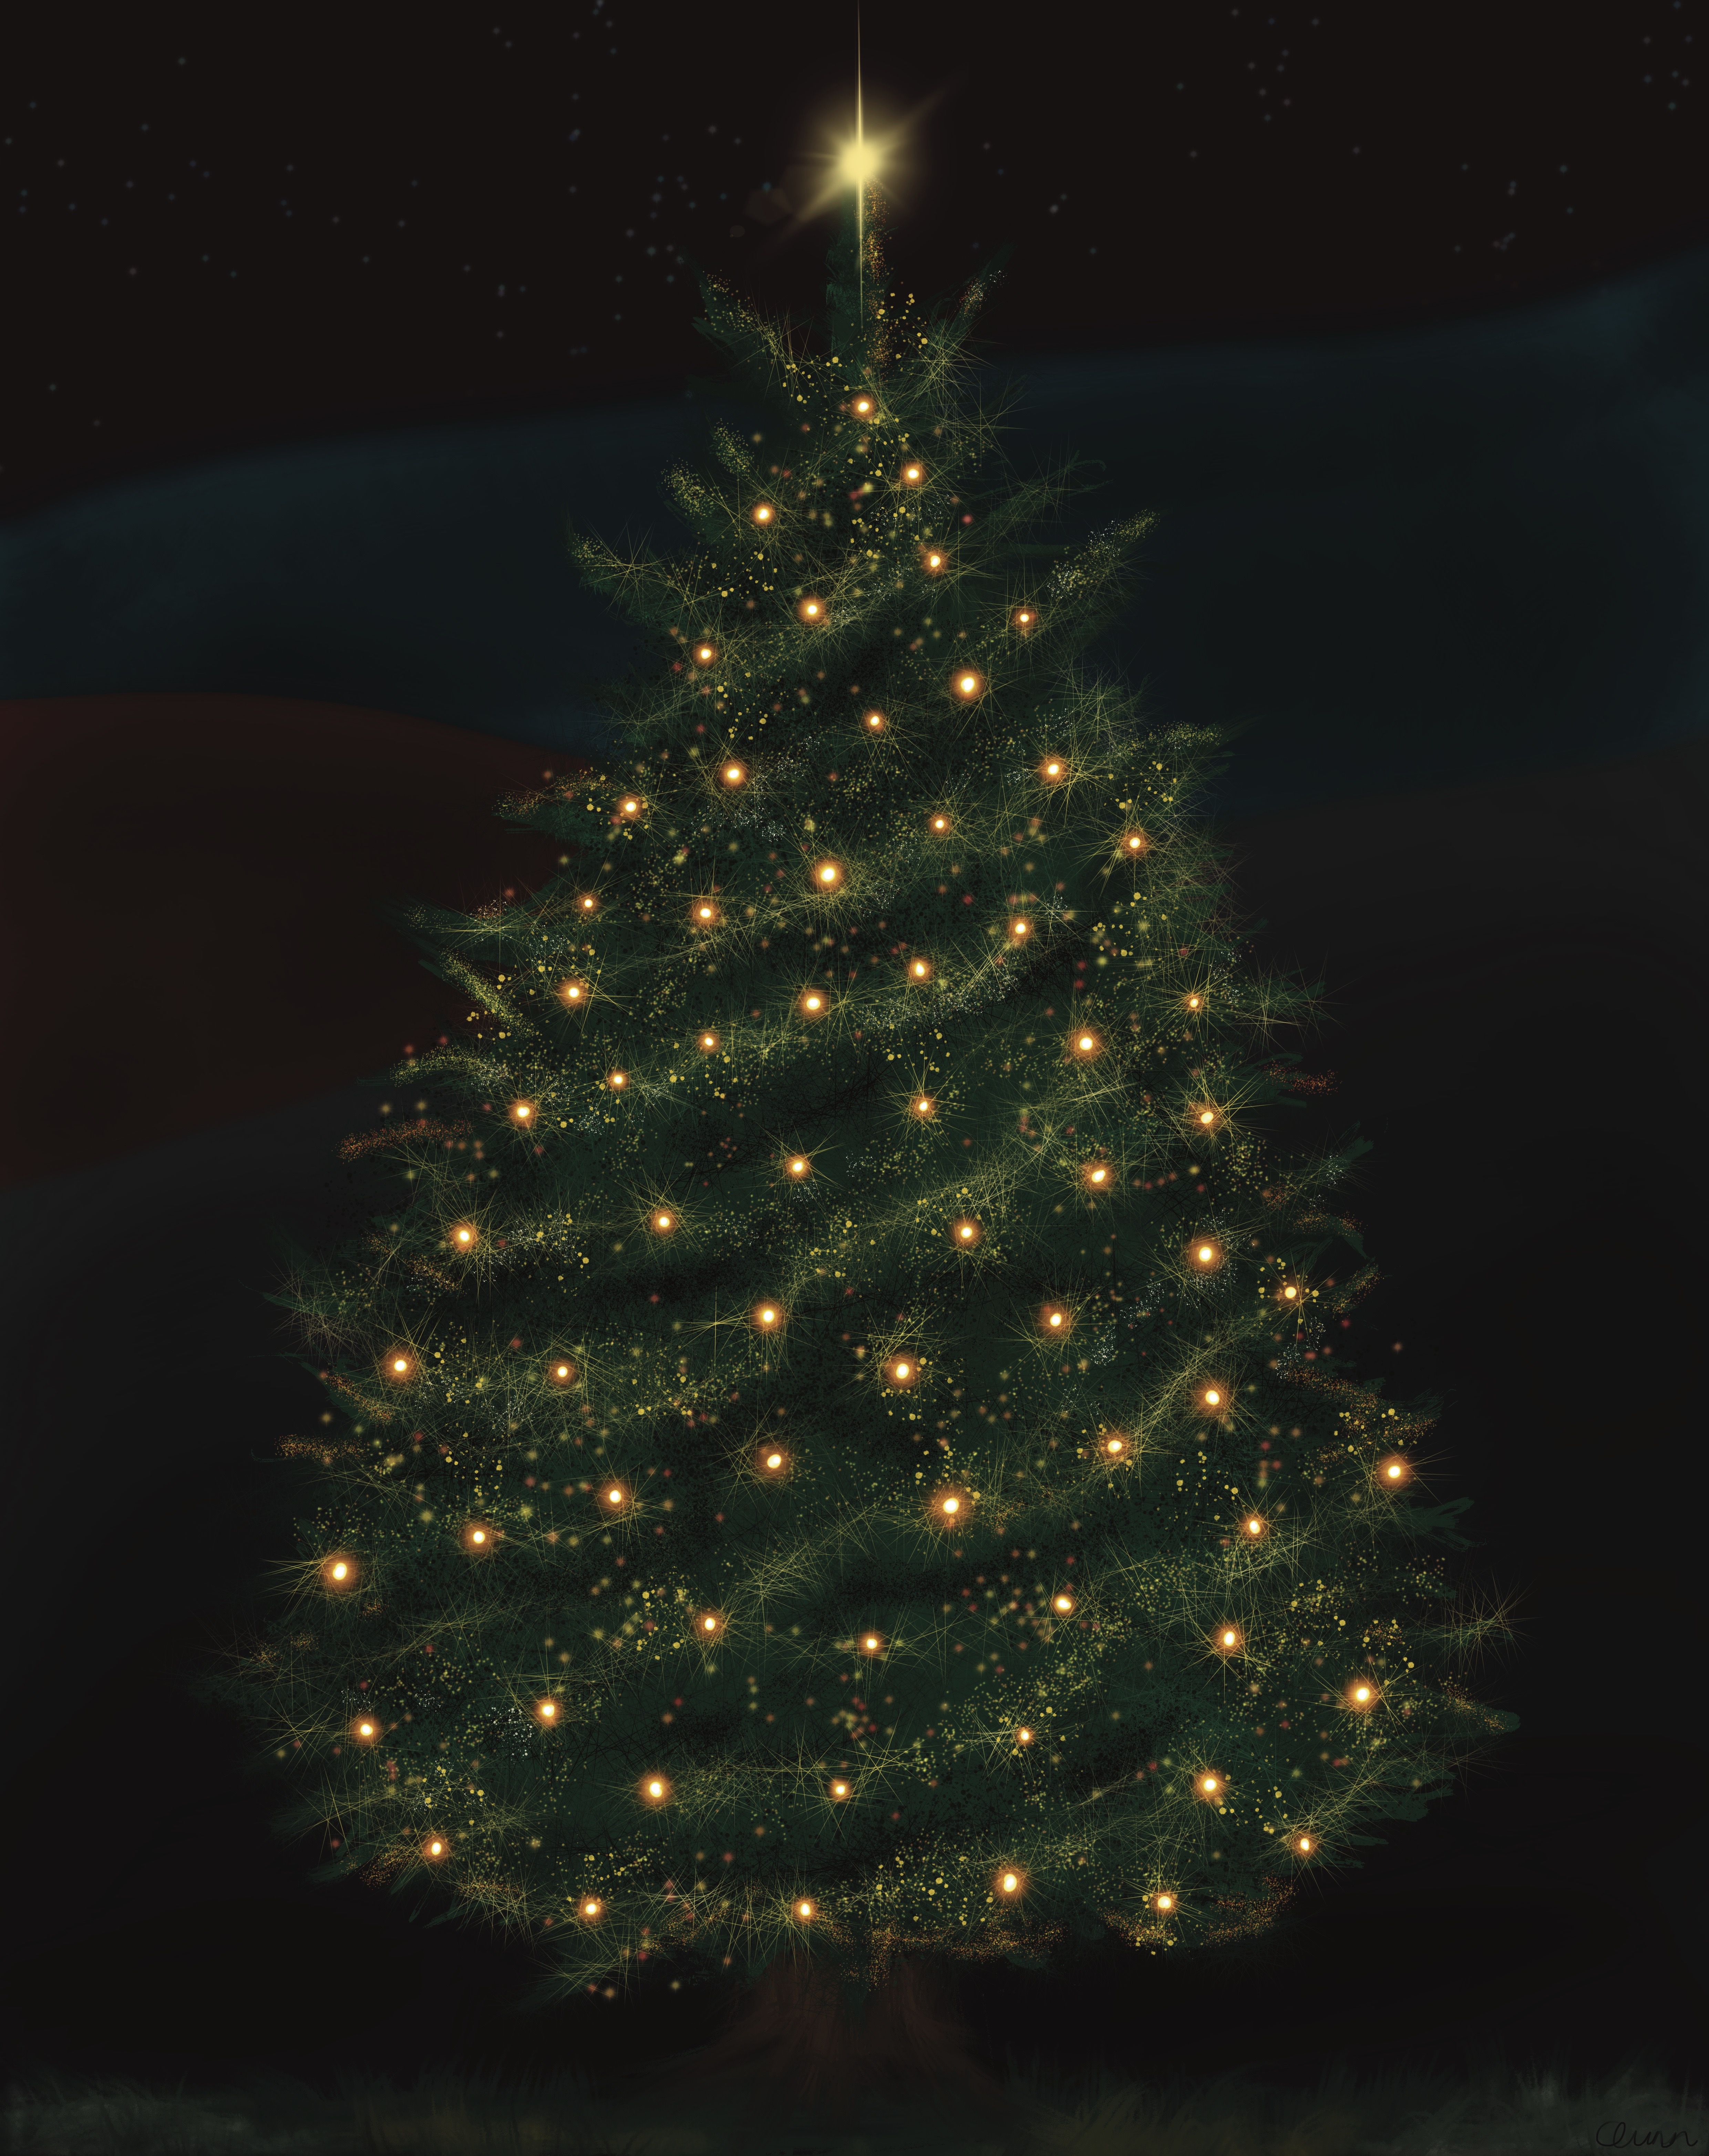 Christmas tree on dark background with golden lights and tinsel